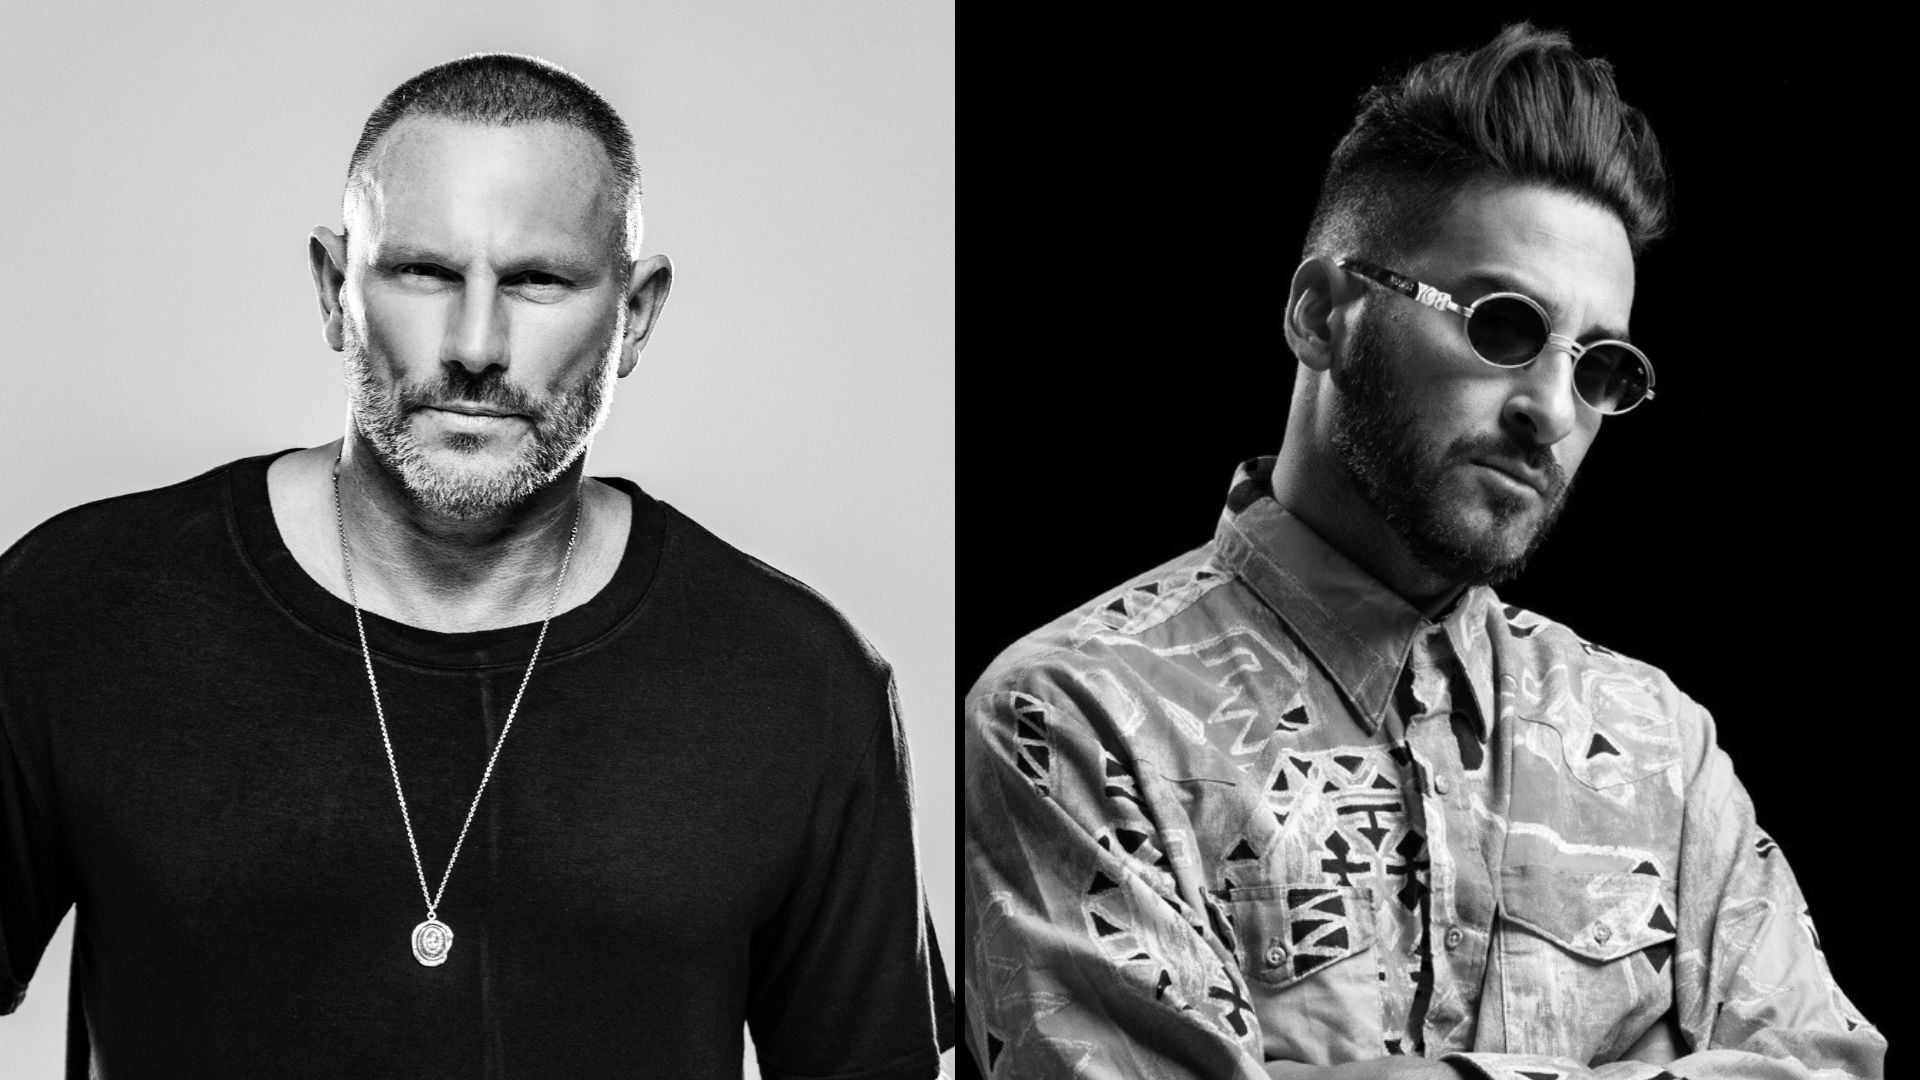 Mark Knight & Armand Van Helden unite once again on 90s-inspired house record ‘Release Me’: Listen